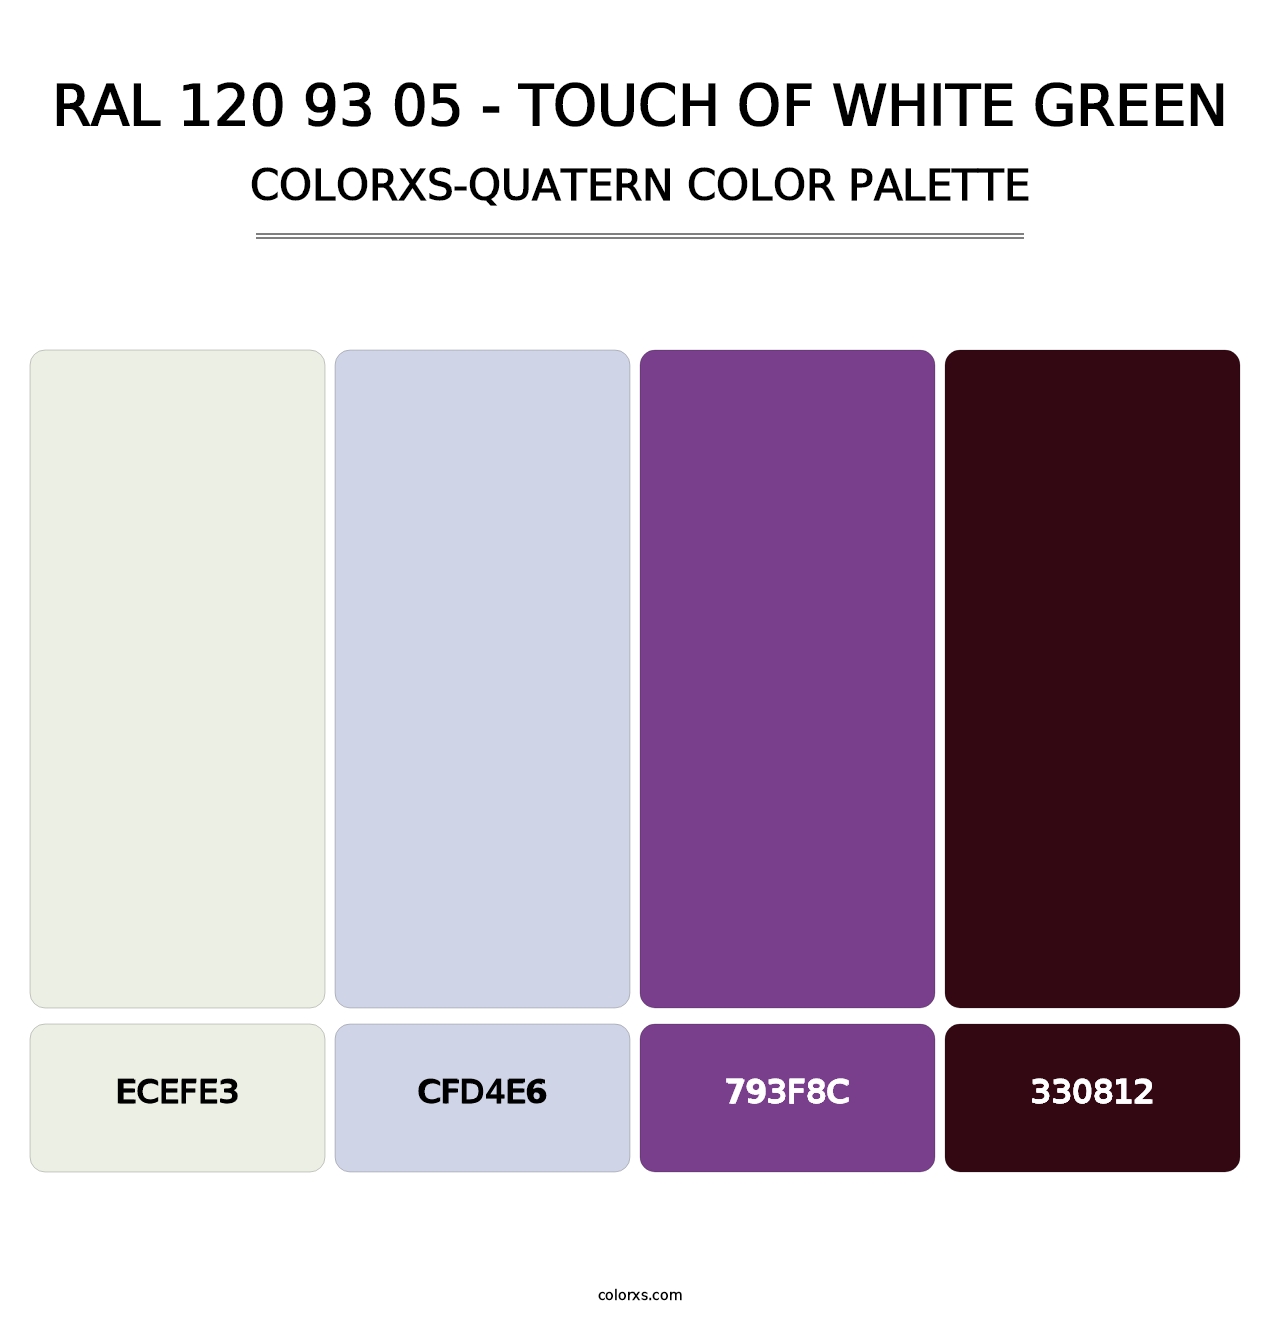 RAL 120 93 05 - Touch Of White Green - Colorxs Quatern Palette